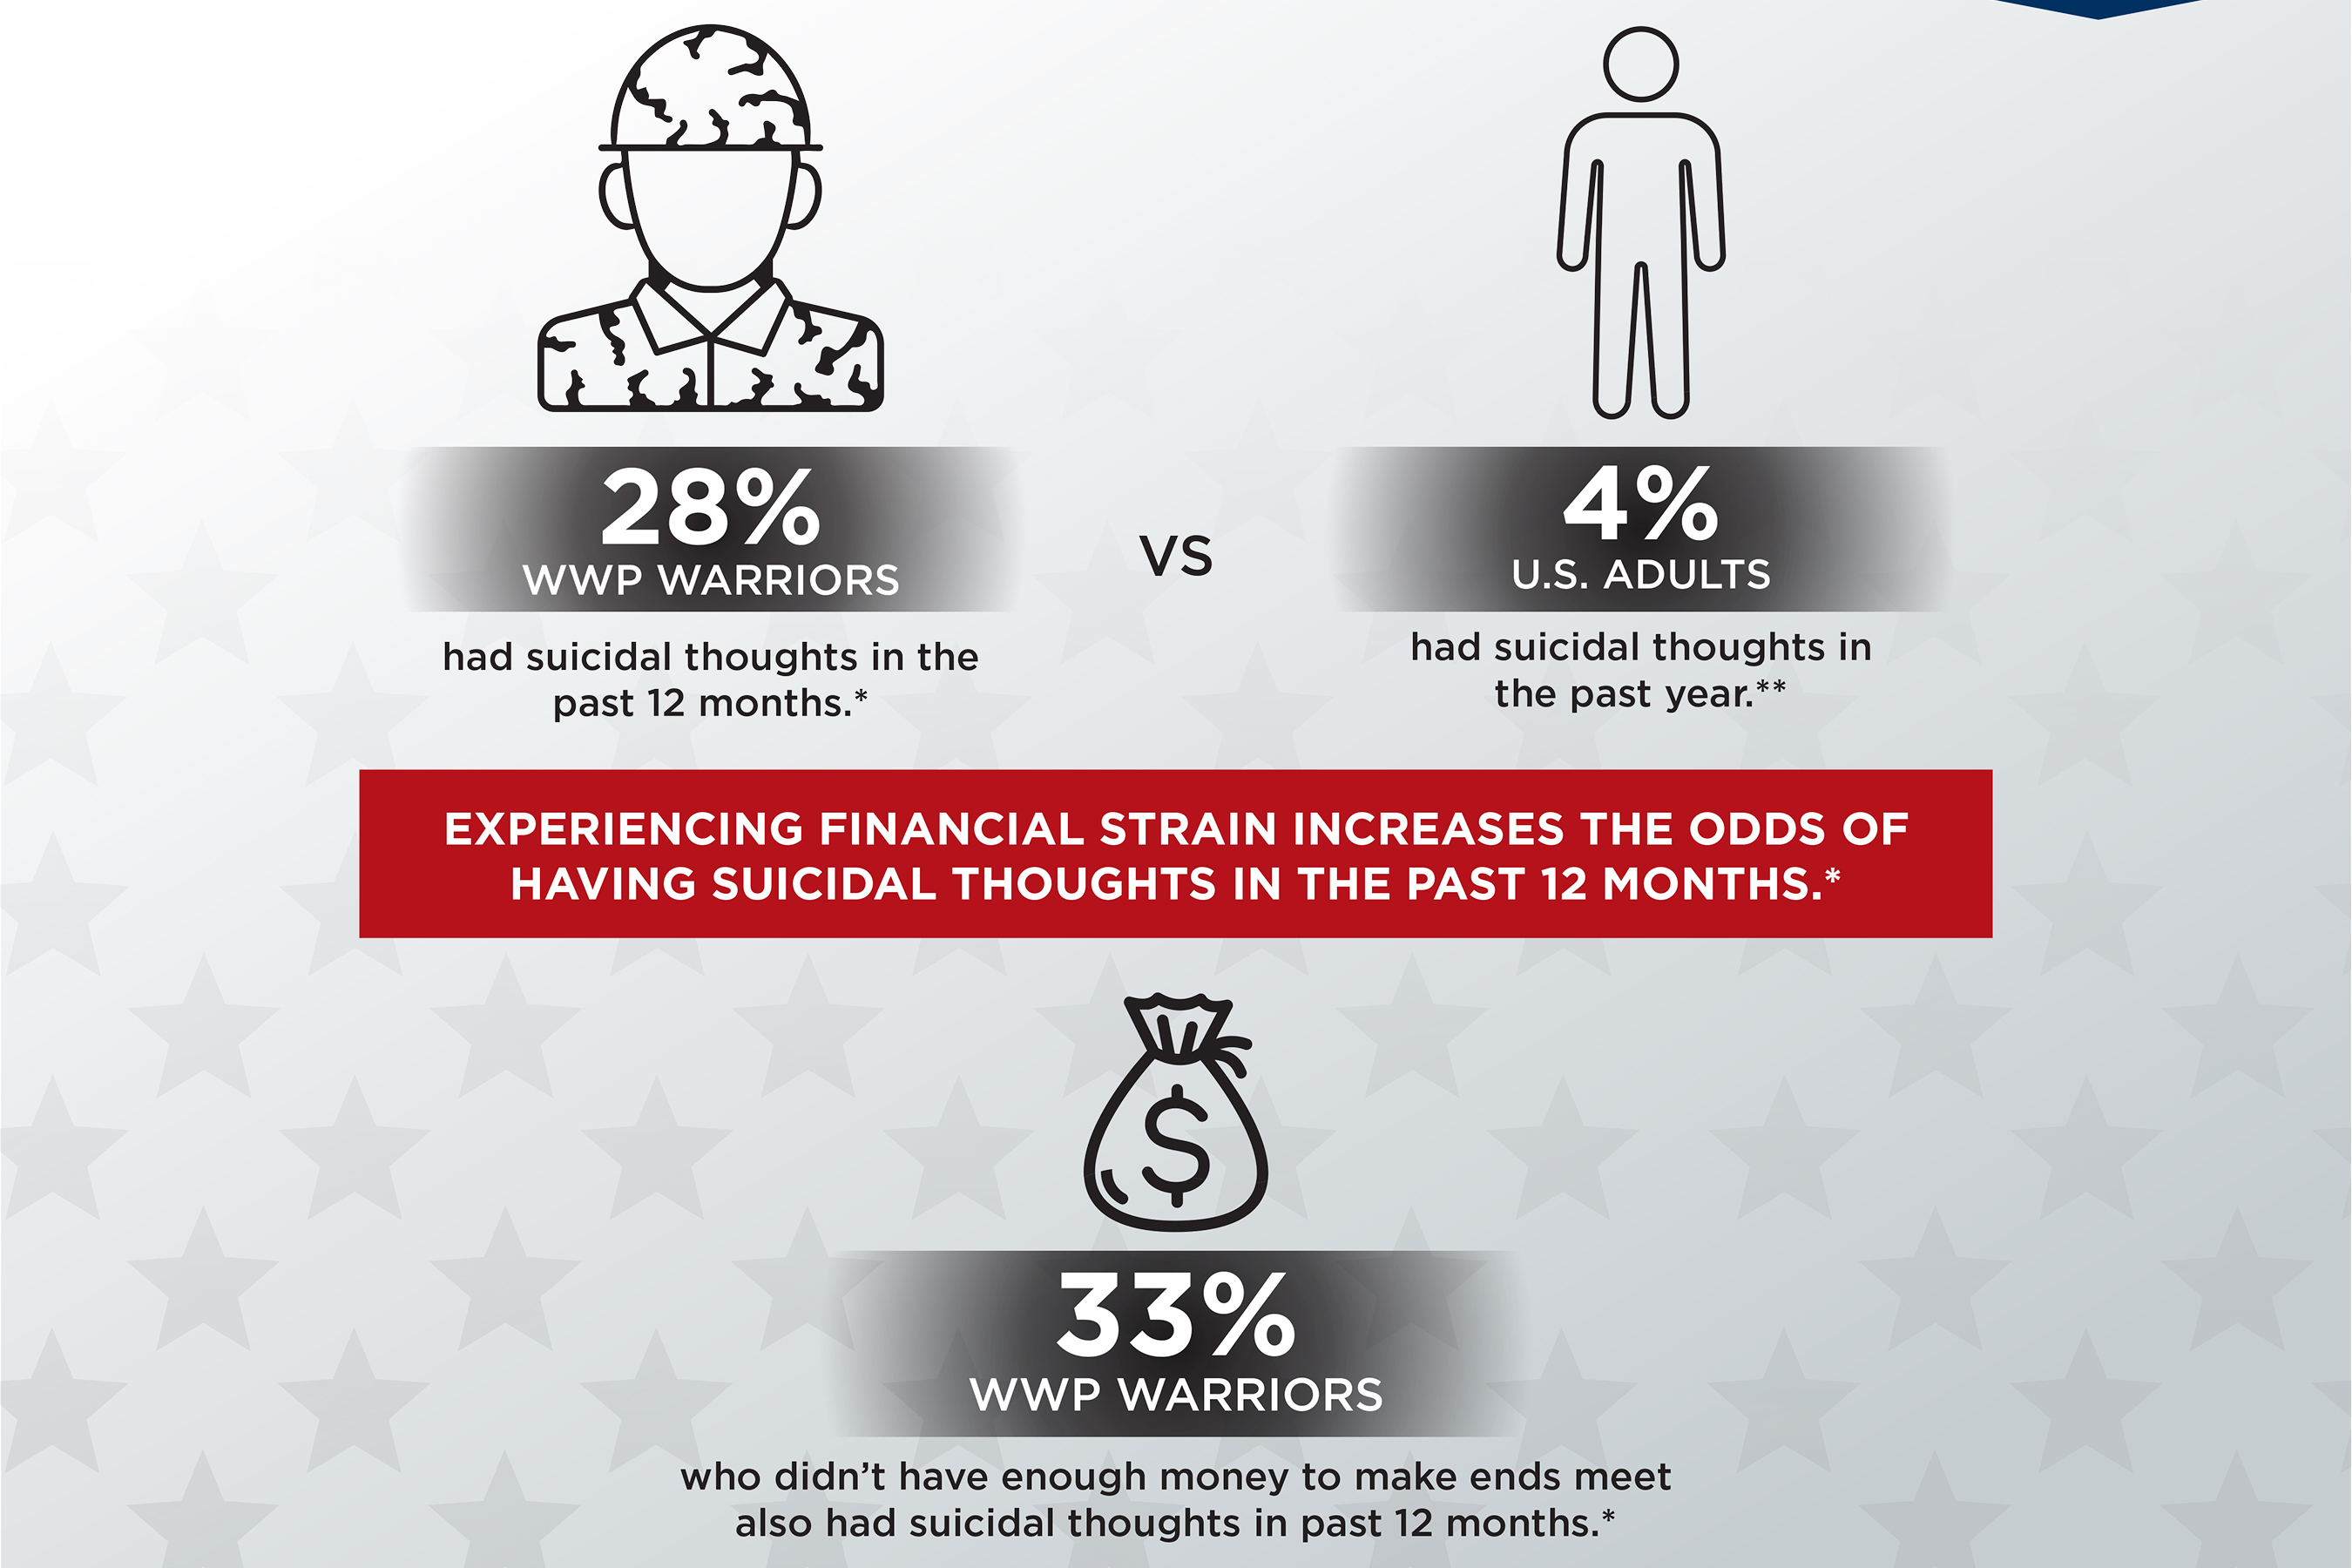 Among veterans registered with Wounded Warrior Project®, those experiencing financial strain are more likely to have suicidal thoughts in the past year than WWP warriors who are not experiencing financial strain. This is concerning, given the non-profit's Annual Warrior Survey notes that 64% of WWP warriors had struggled to make ends meet at some point in the last 12 months.